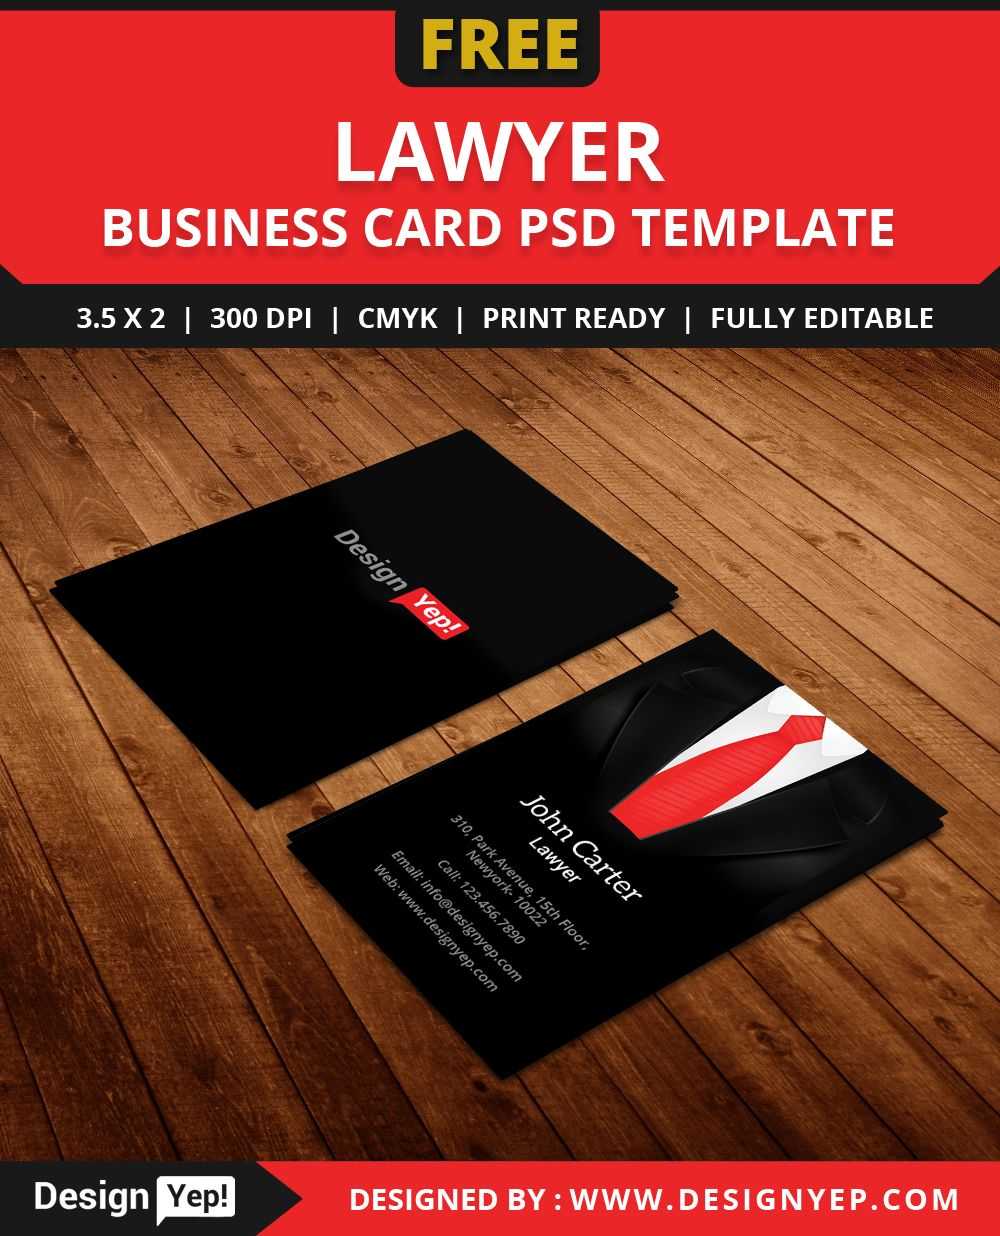 Free Lawyer Business Card Template Psd | Free Business Card With Calling Card Free Template